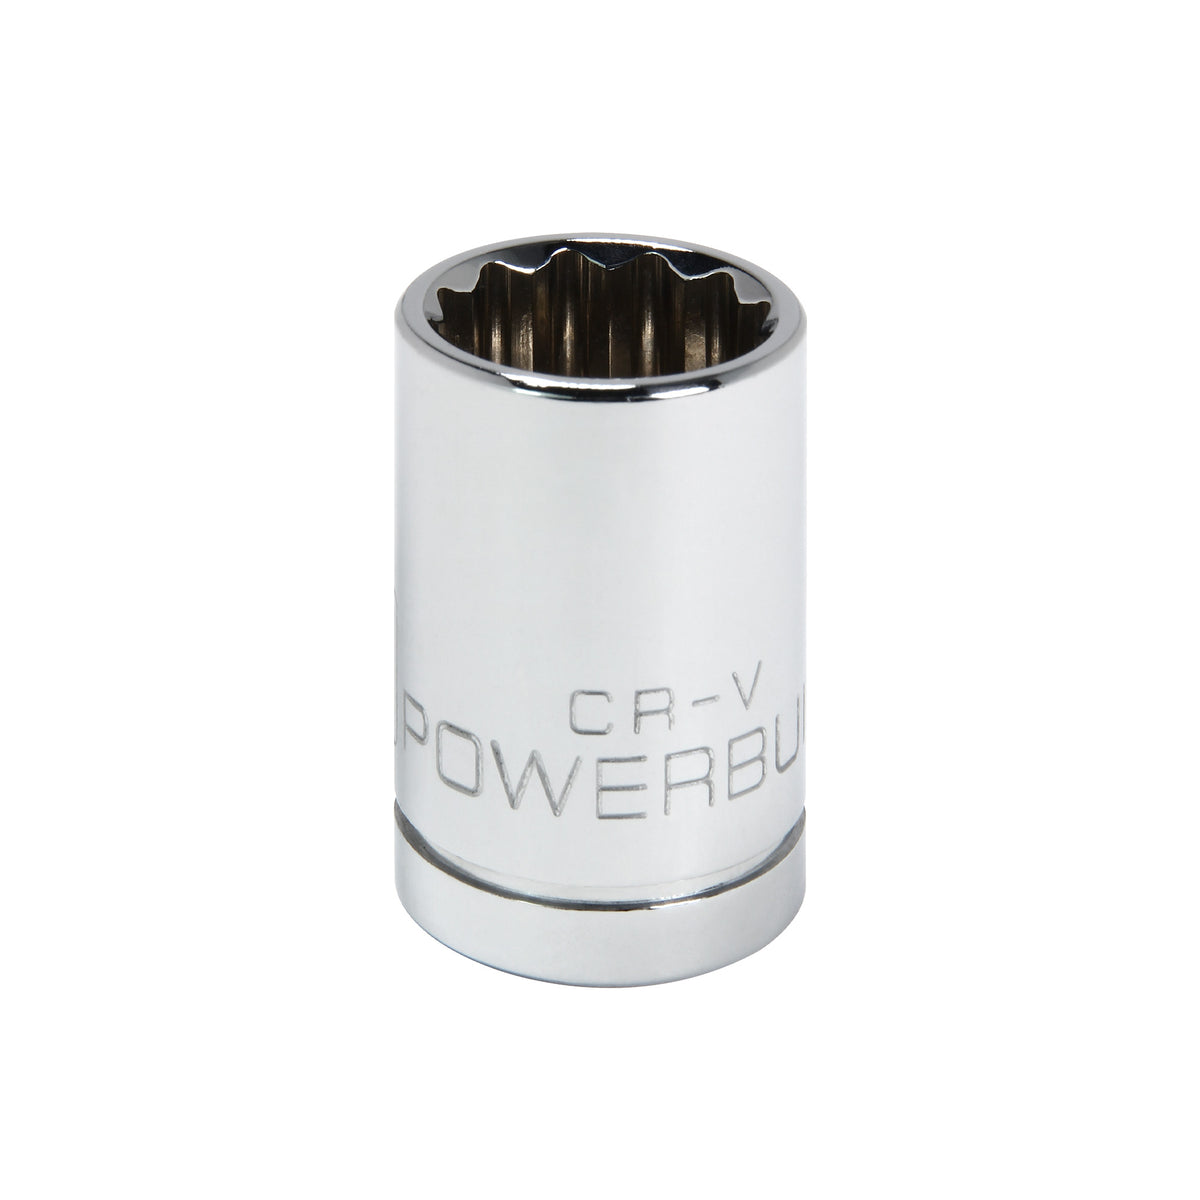 1/2 Inch Drive x 17 MM 12 Point Shallow Socket